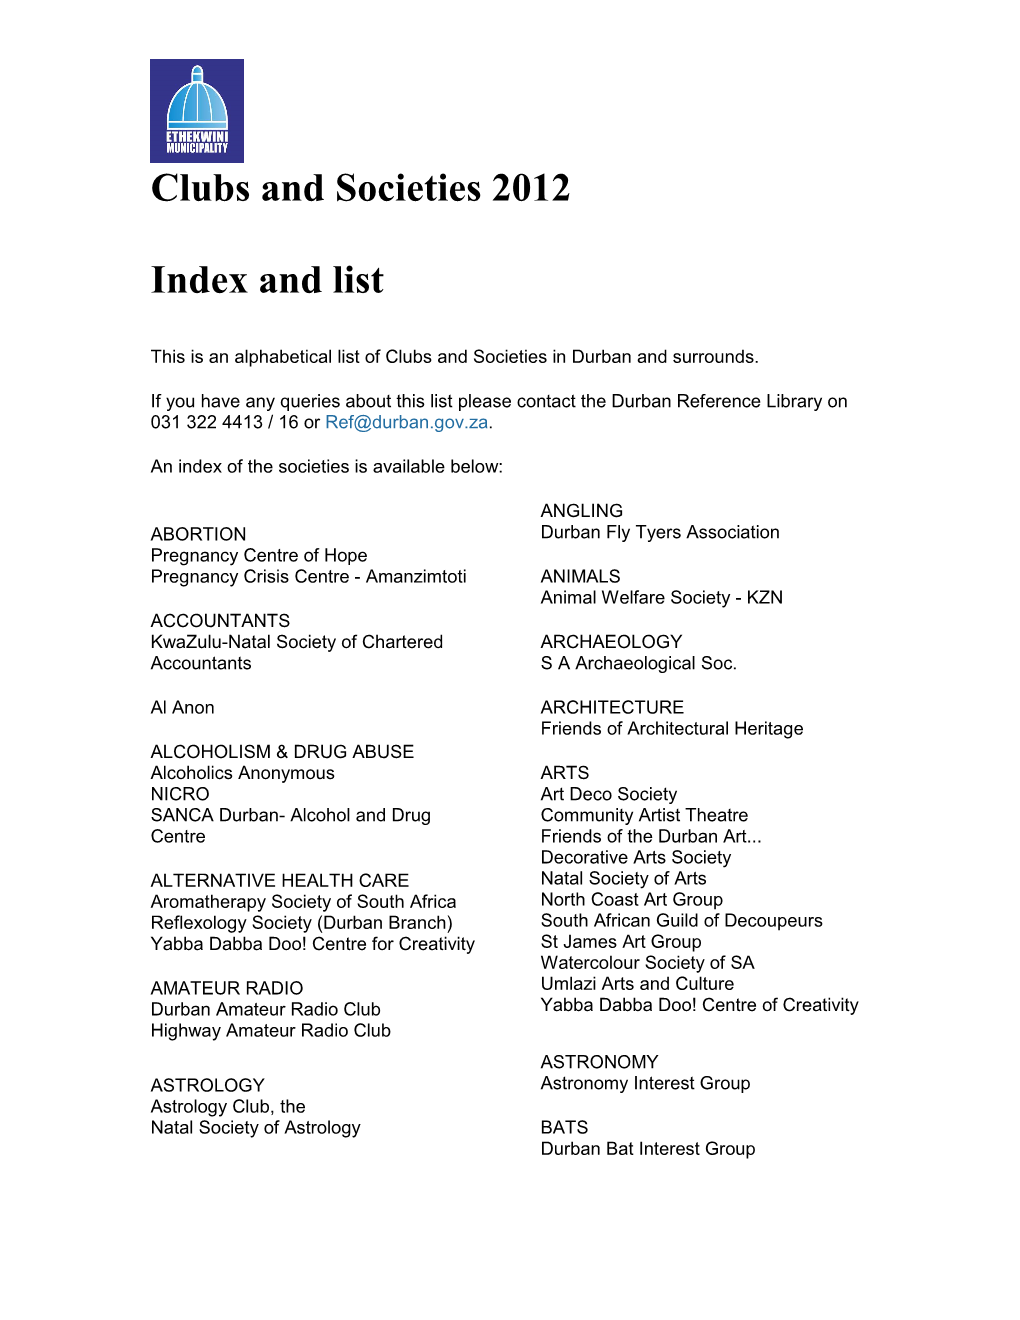 Clubs and Societies 2012 Index and List